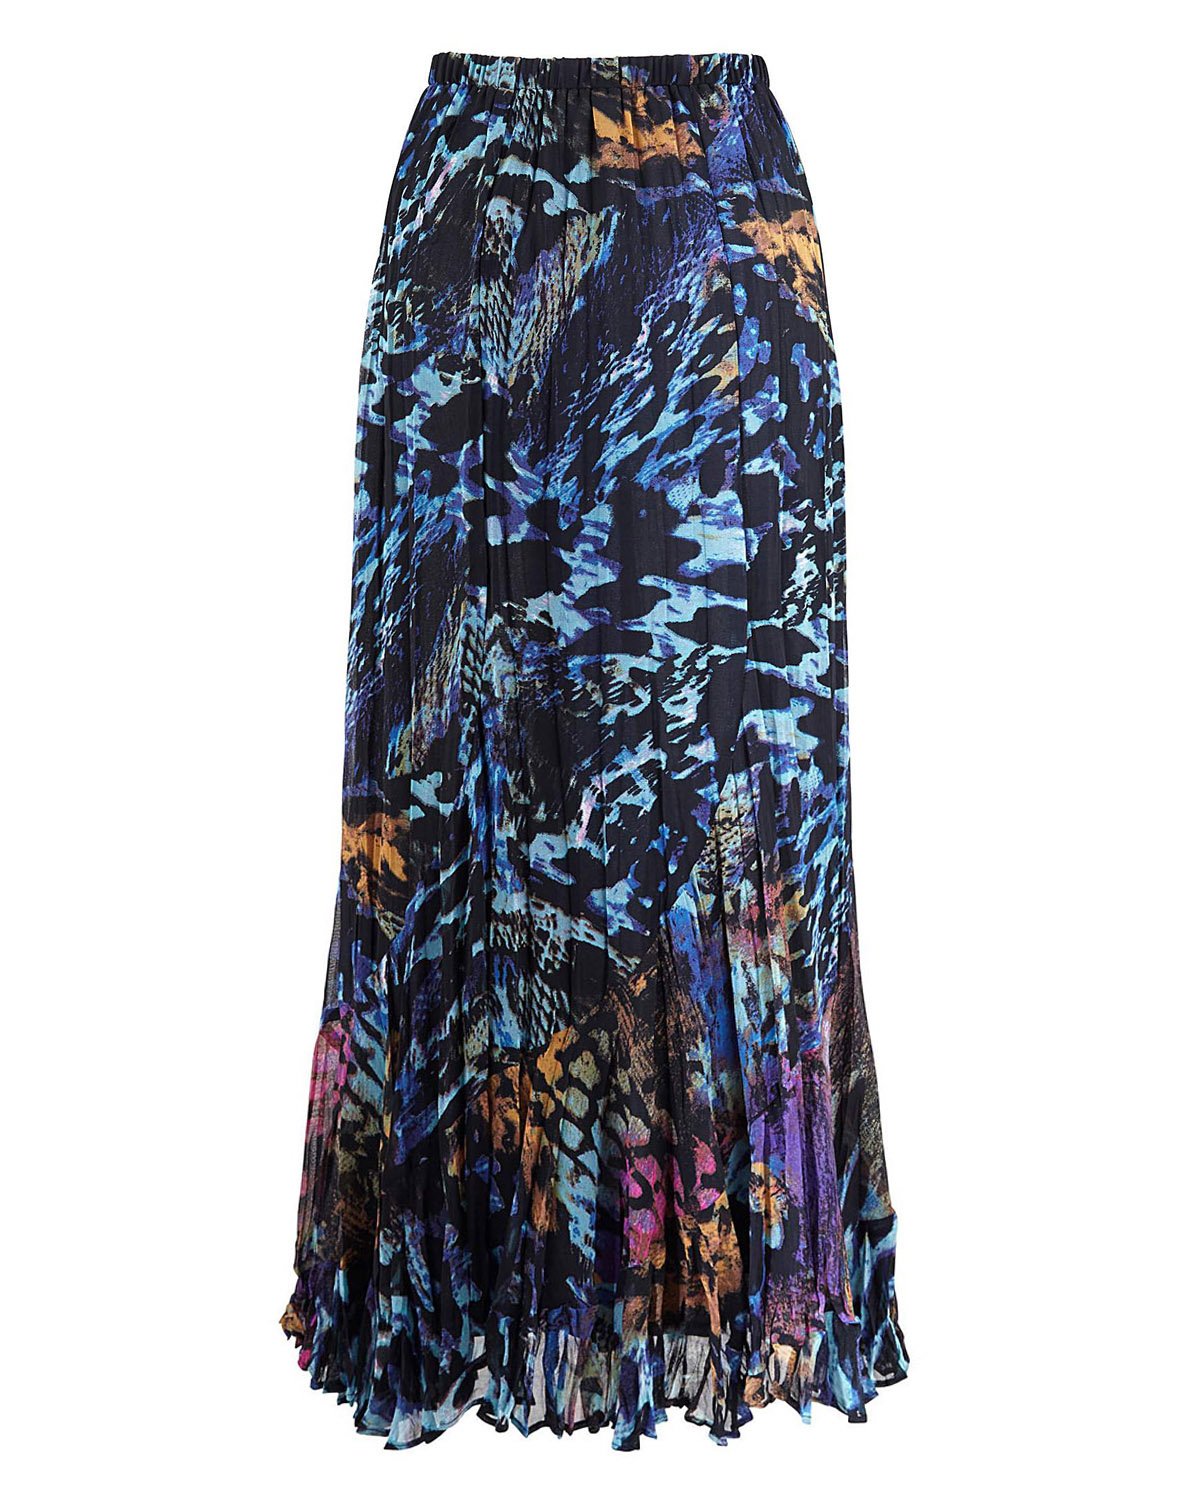 Together BLACK Printed Maxi Skirt - Plus Size 14 to 22